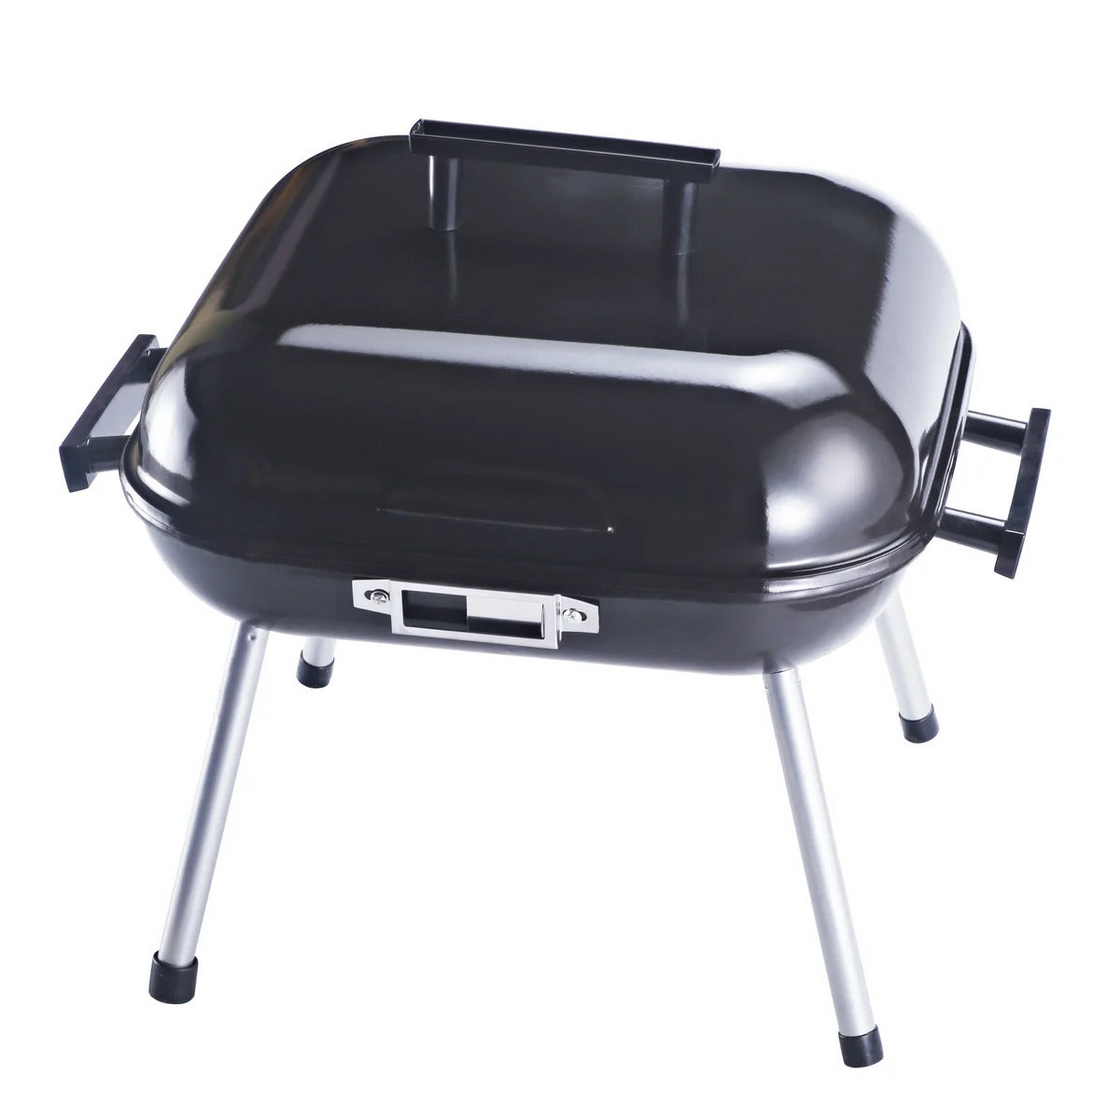 14-Inch Portable Charcoal Grill - Compact and Versatile BBQ Grill